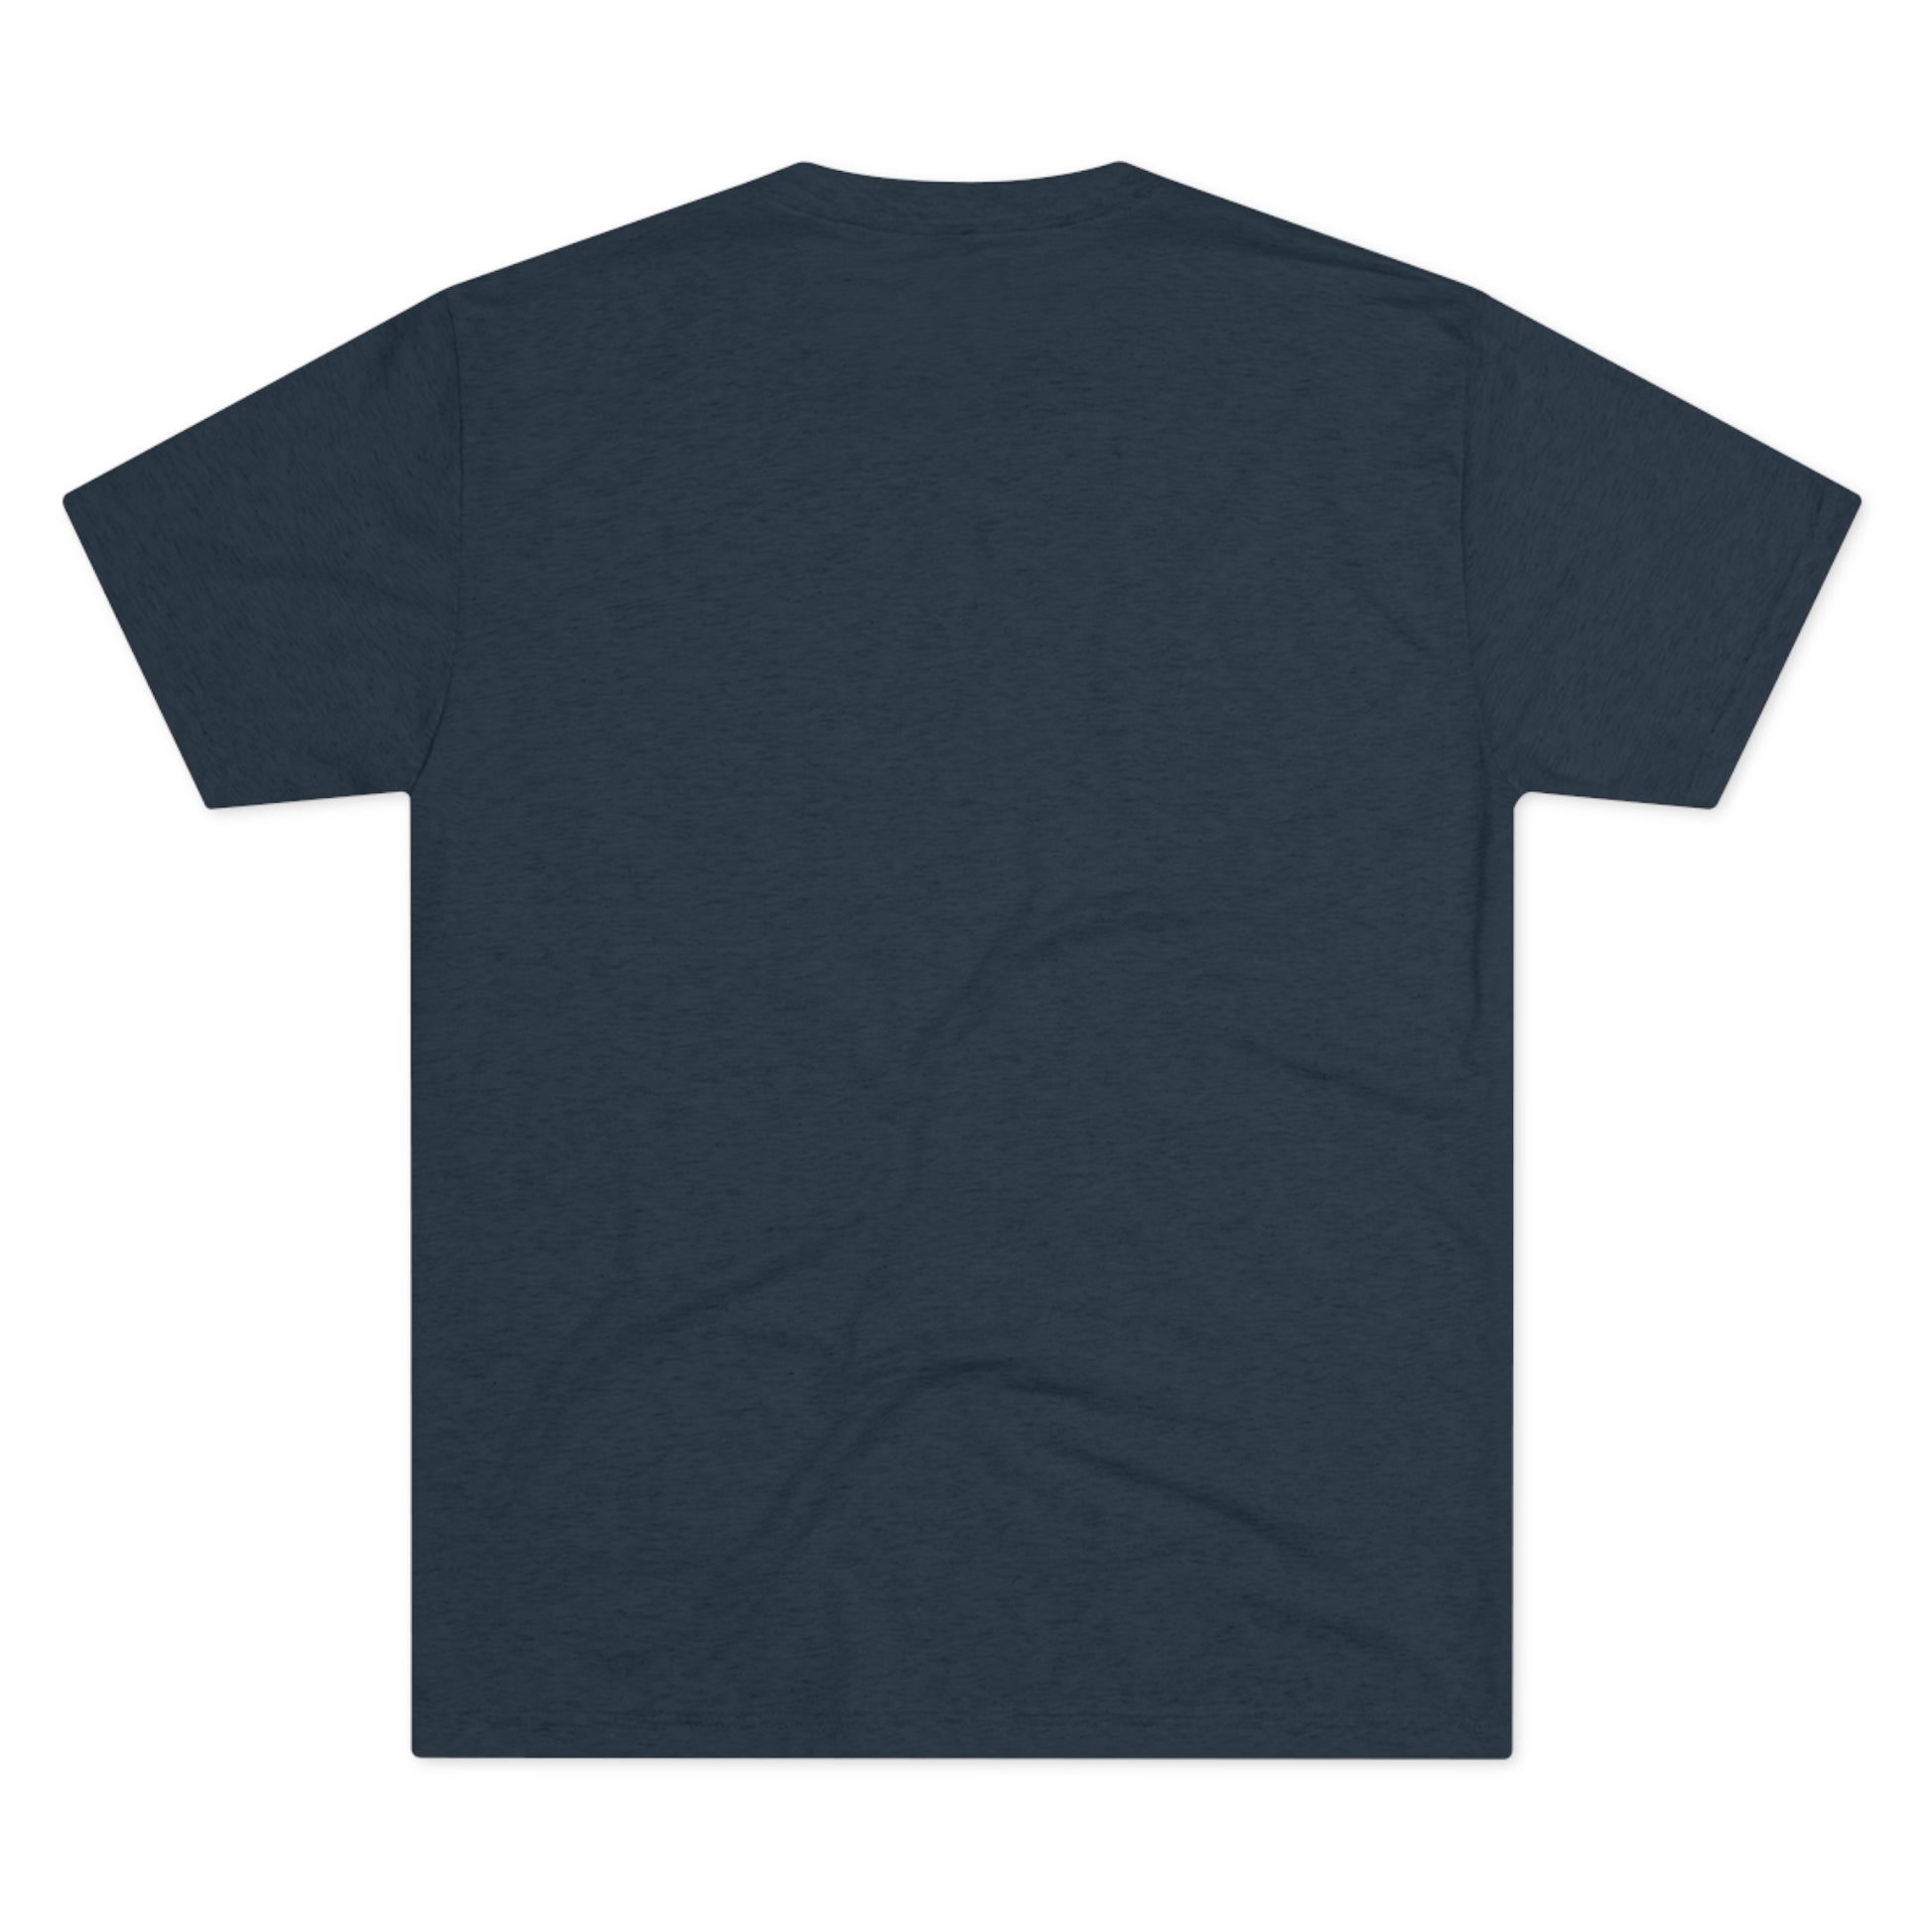 Plain navy blue Inhale Strength Exhale Doubt w Images - Unisex Tri-Blend Crew Tee by Printify displayed from the back on a white background. The shirt is smooth with no visible logos or designs. Ideal for workout apparel.